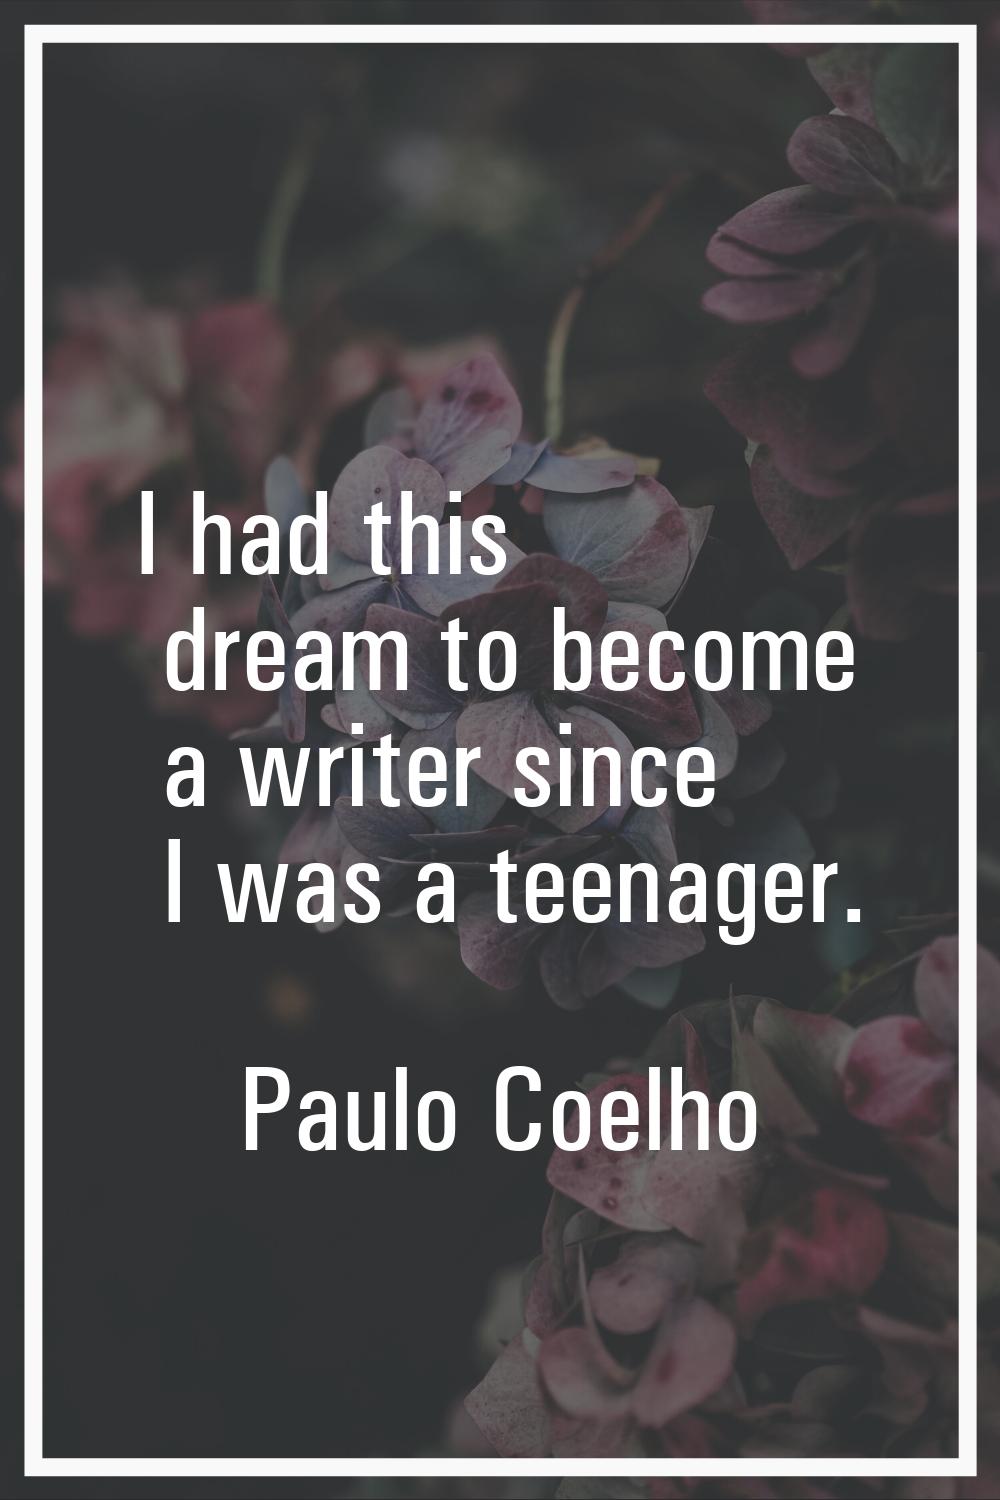 I had this dream to become a writer since I was a teenager.